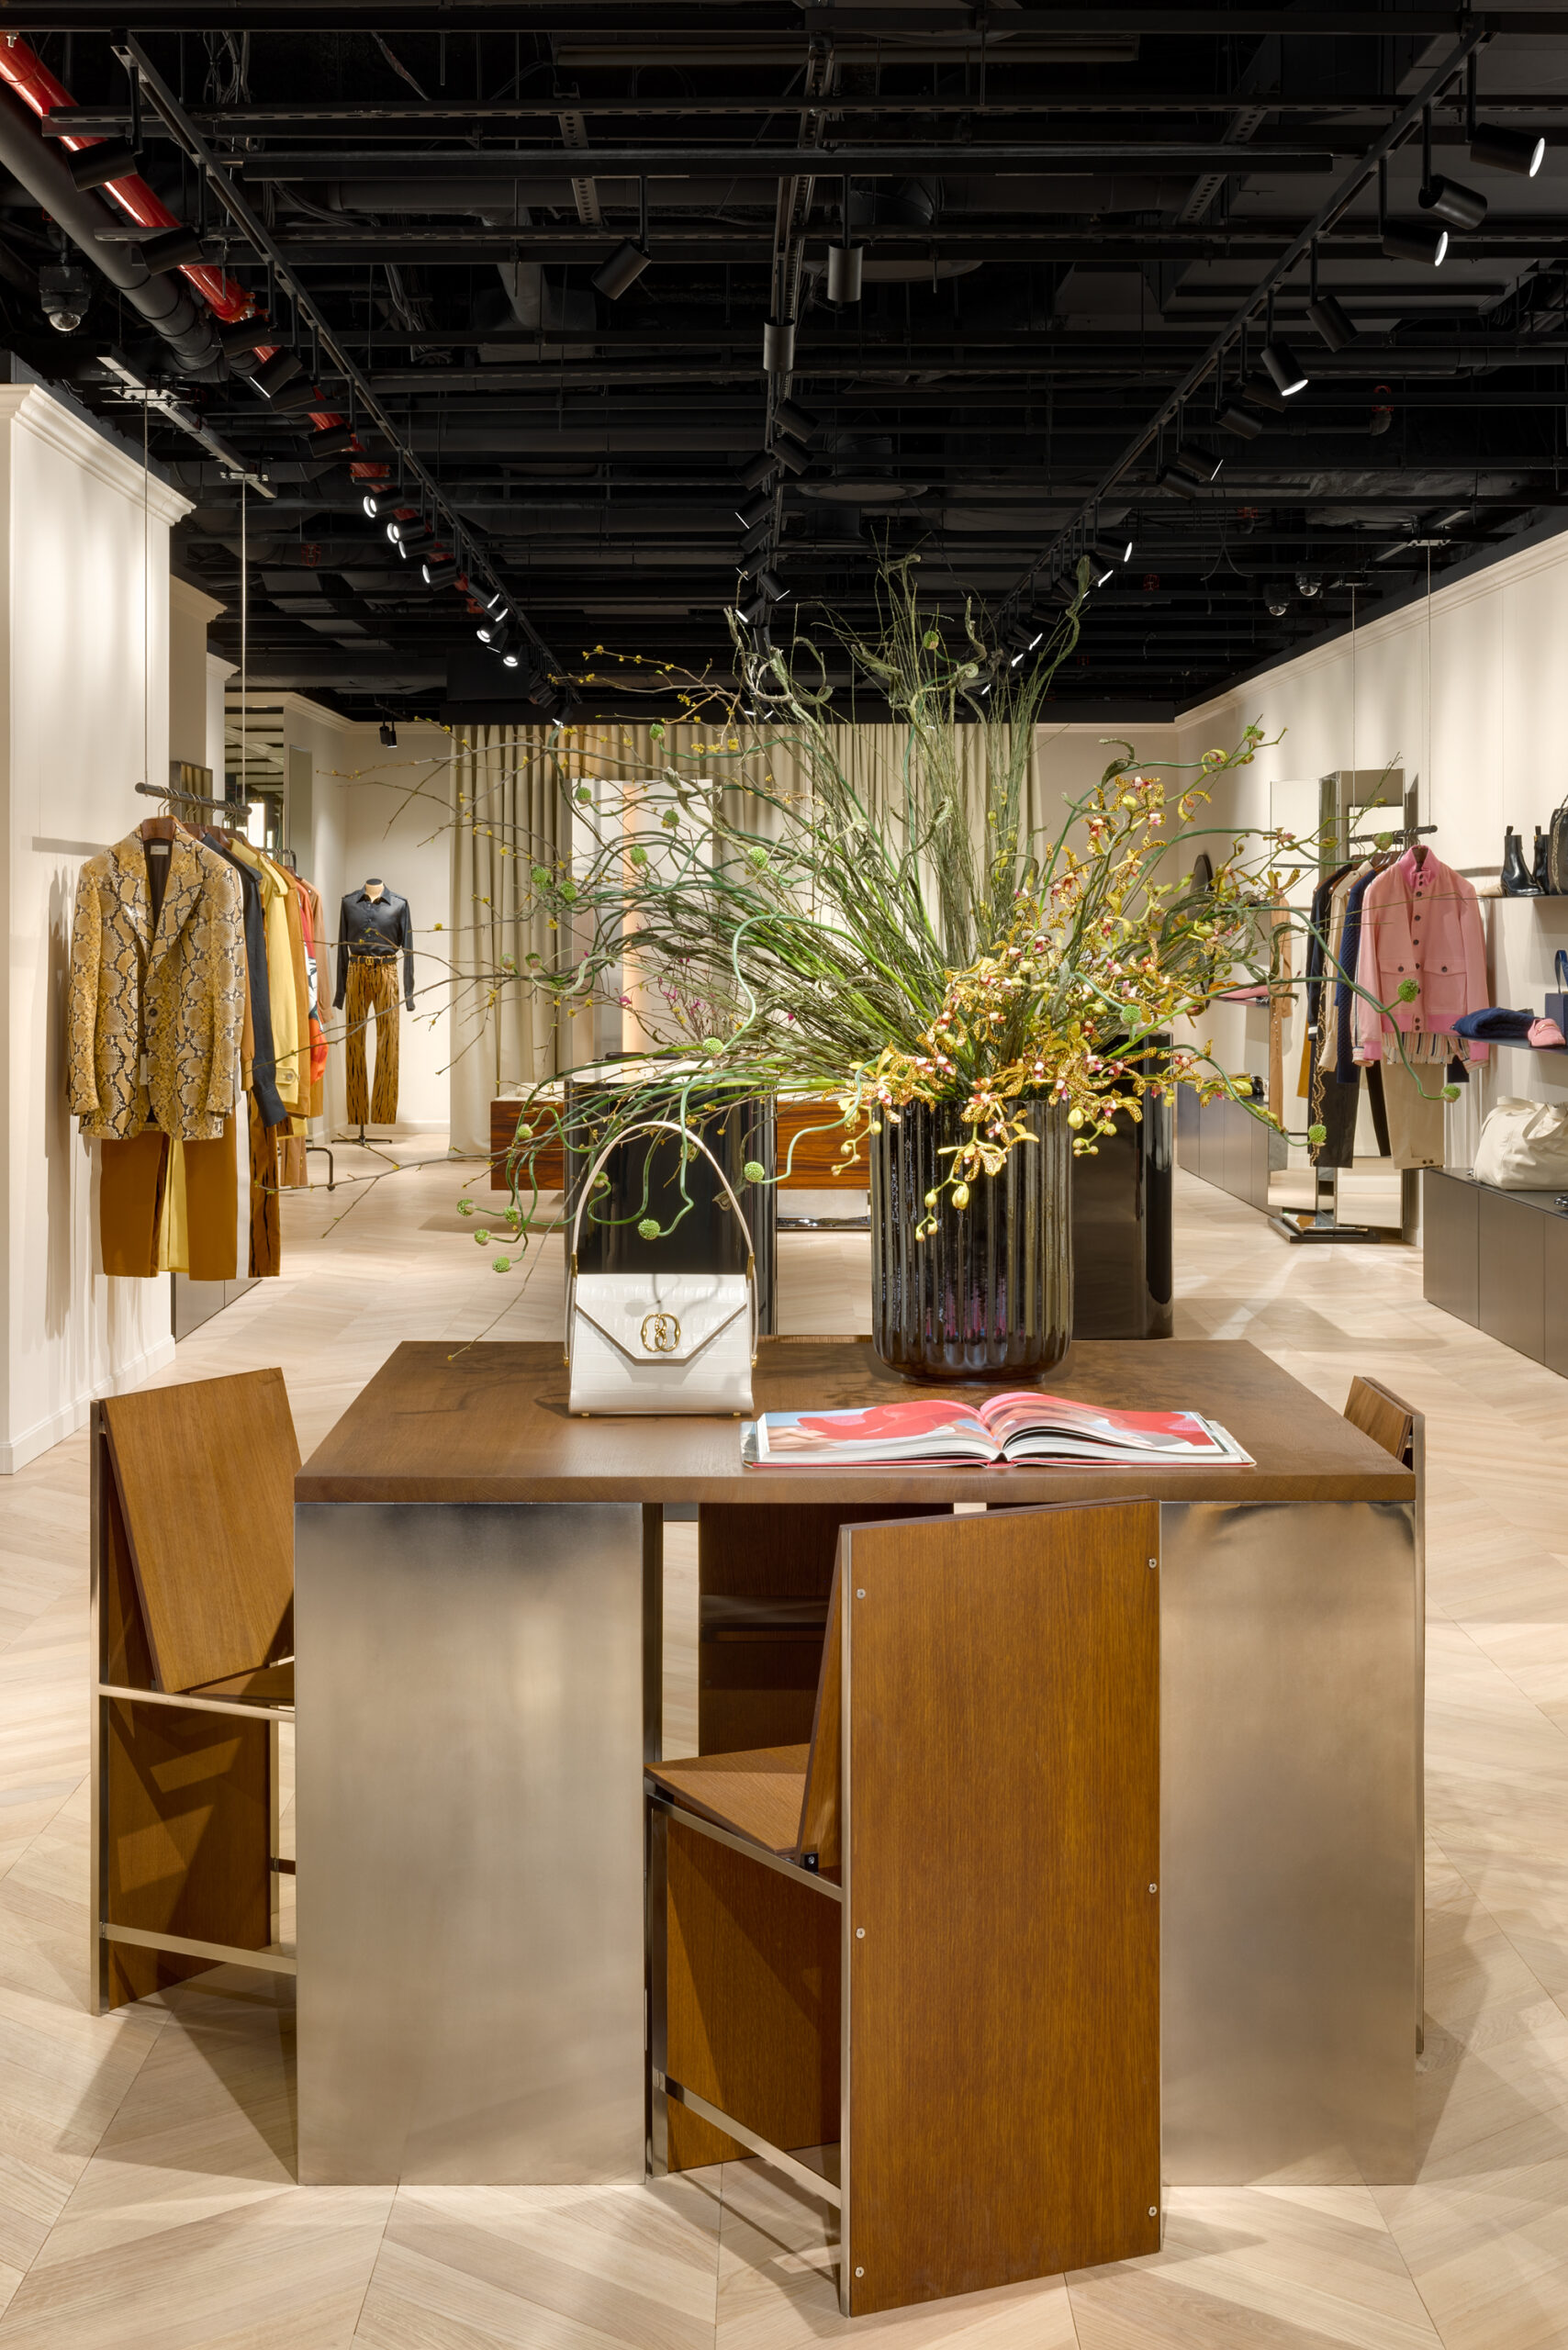 Bally reopens its New York flagship store in Meatpacking District